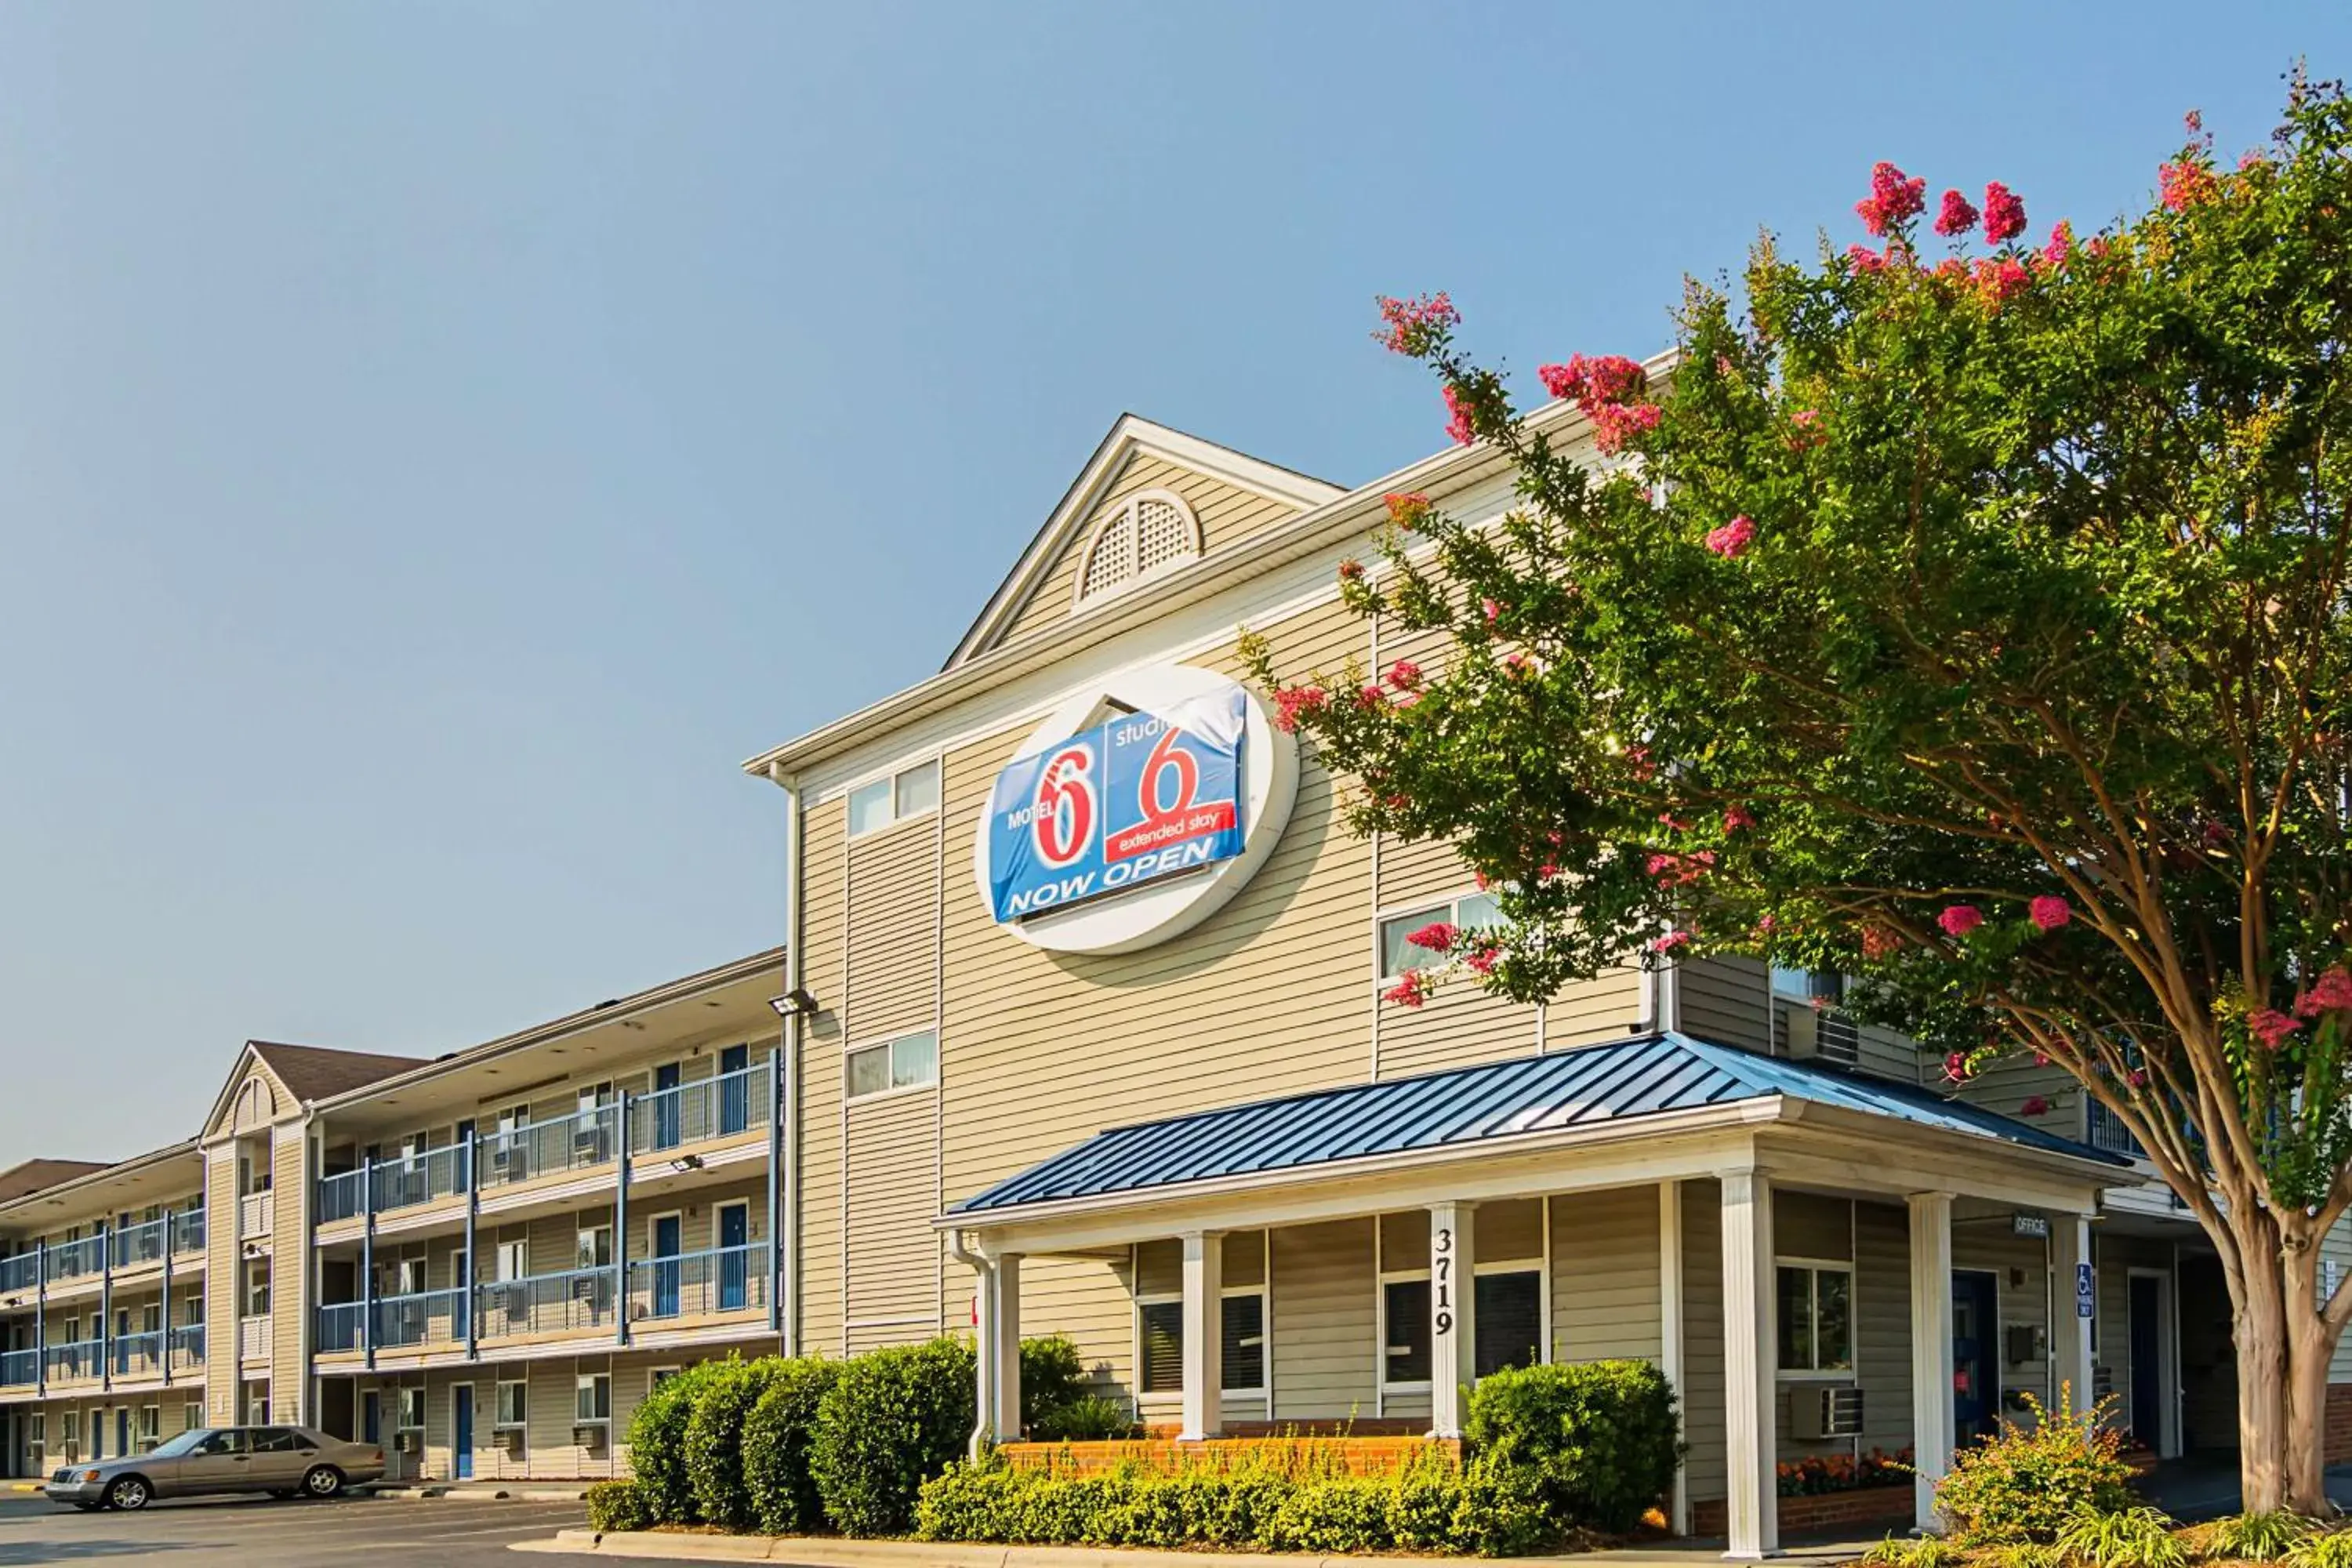 Property building in Motel 6-Fayetteville, NC - Fort Bragg Area